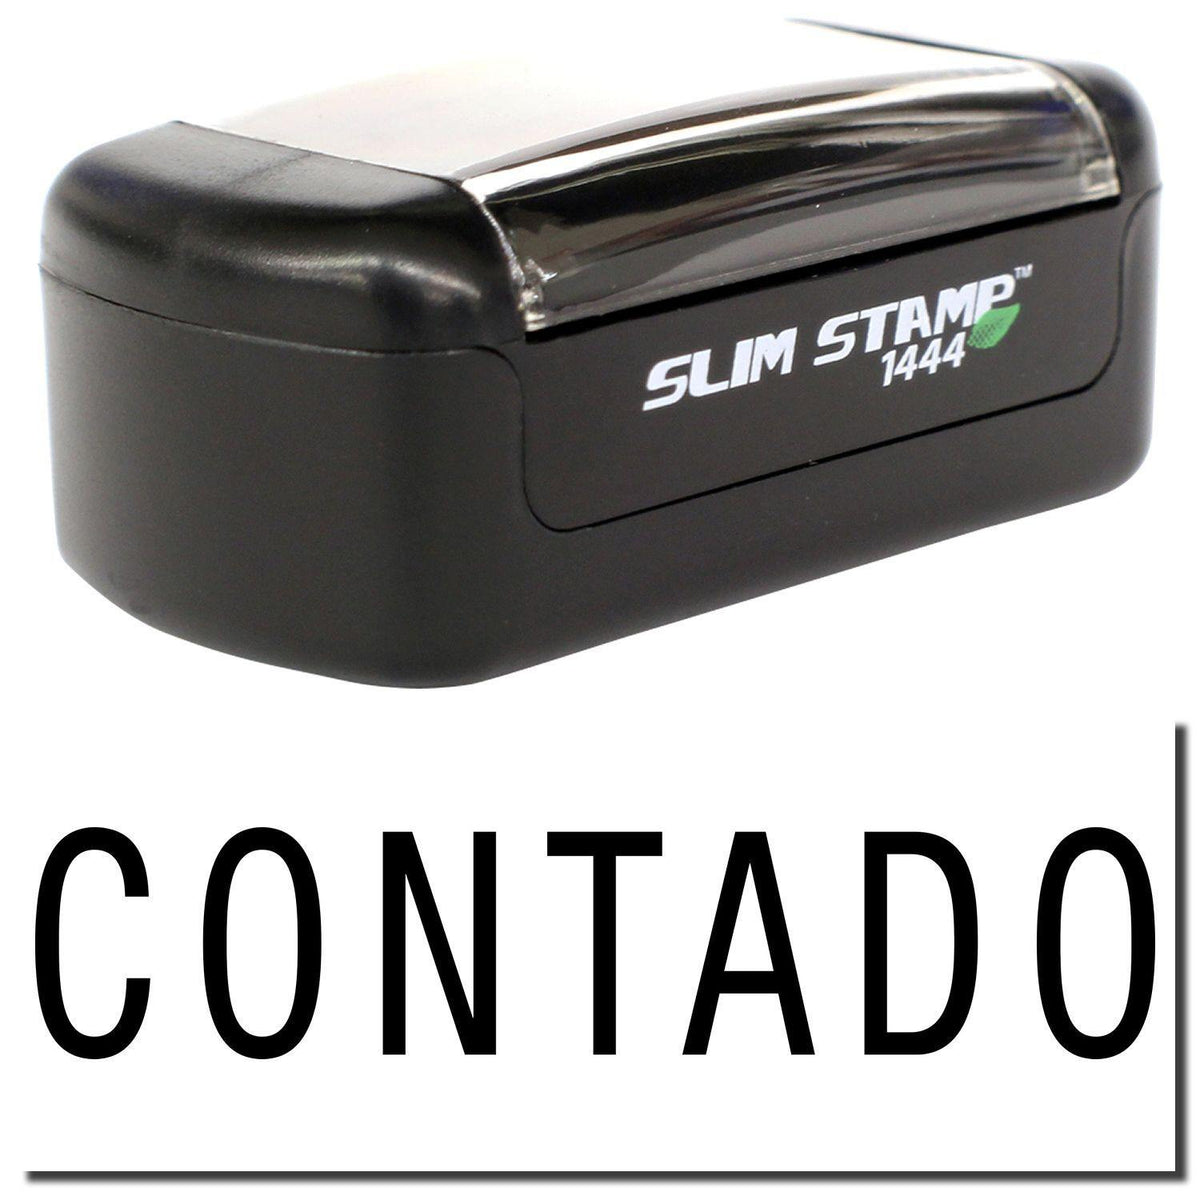 A stock office pre-inked stamp with a stamped image showing how the text &quot;CONTADO&quot; is displayed after stamping.